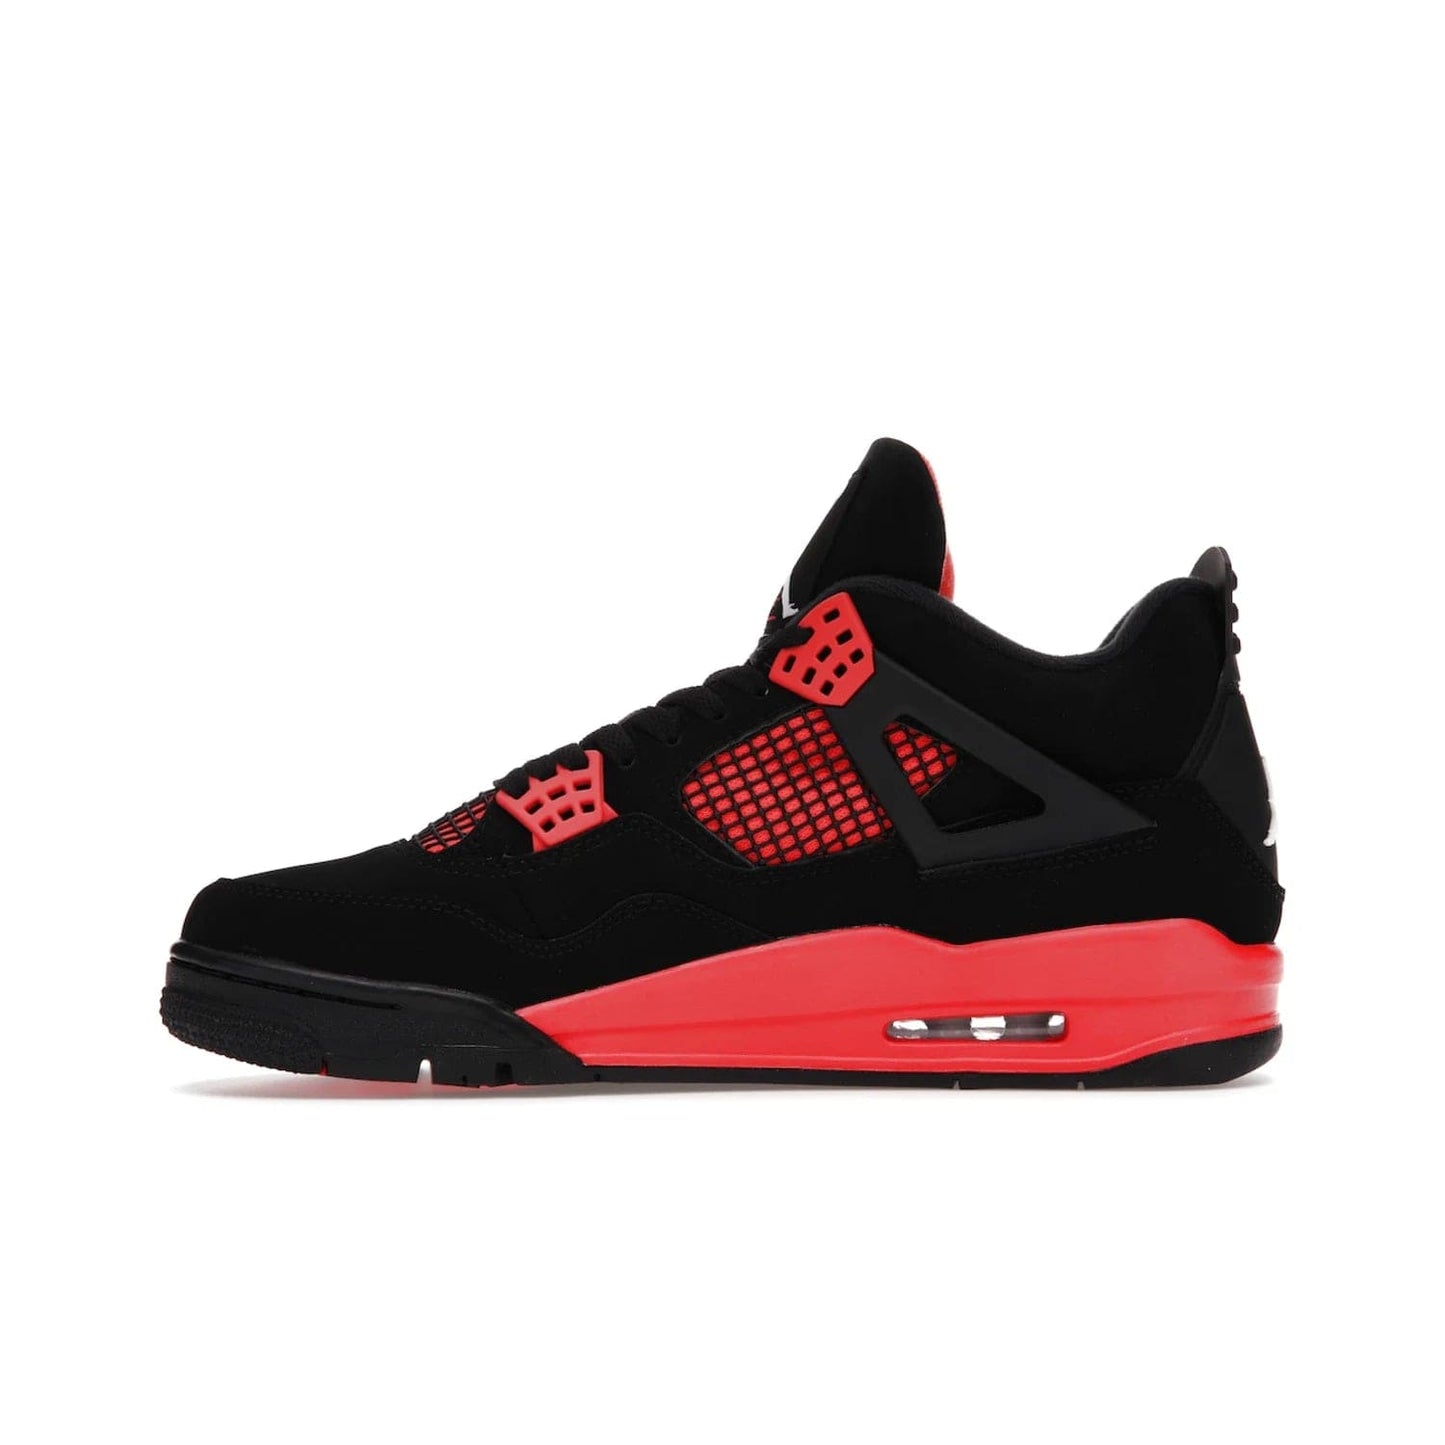 Jordan 4 Retro Red Thunder - Image 19 - Only at www.BallersClubKickz.com - Upscale your footwear with the Air Jordan 4 Retro Red Thunder. Featuring a Durabuck upper, red underlays, signature Flight patch, and vibrant red midsole, this retro sneaker adds style and edge. Releases in January 2022.